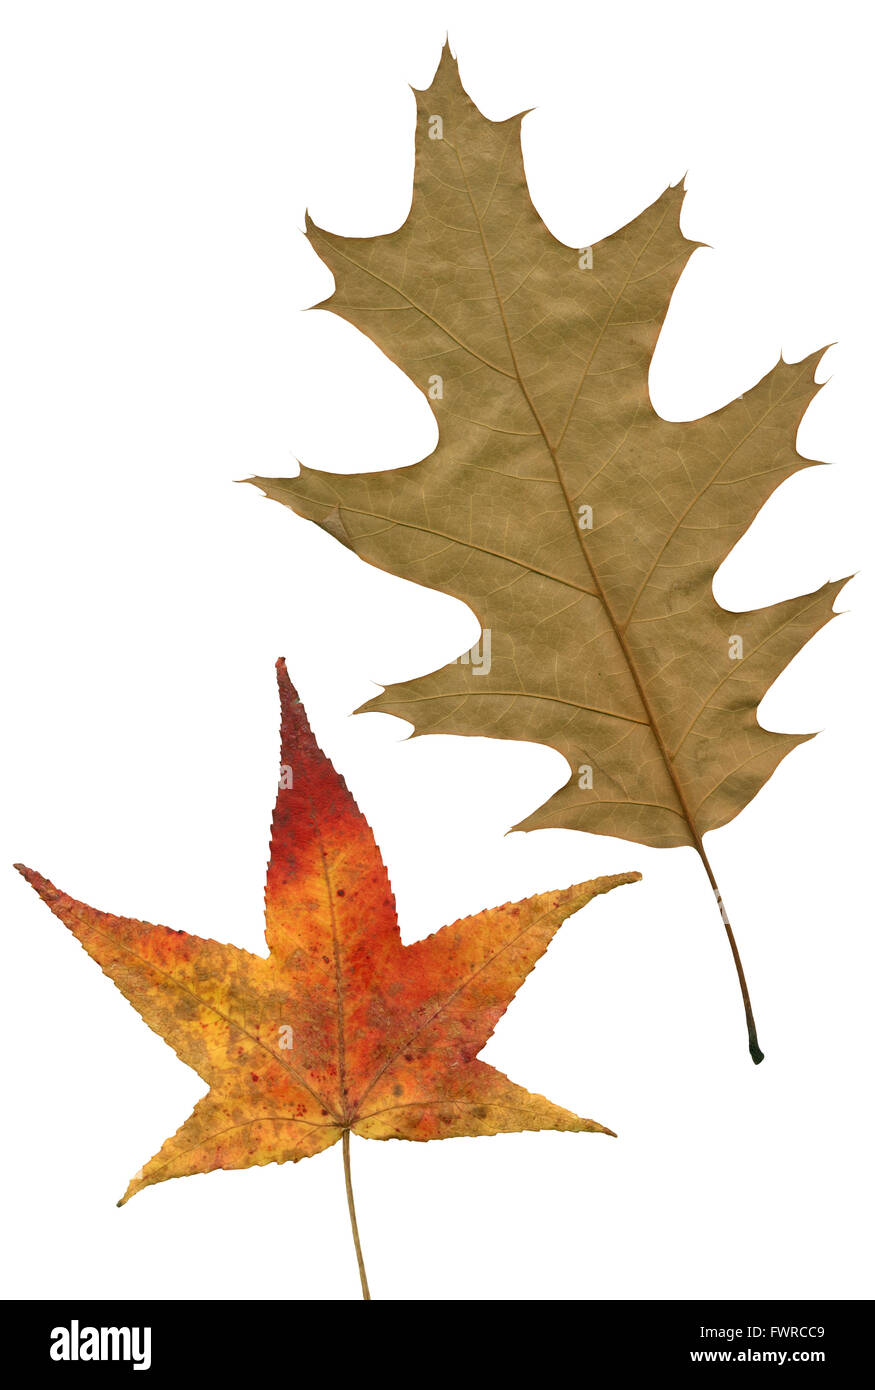 Two autumn leaves carved on a white background. Stock Photo